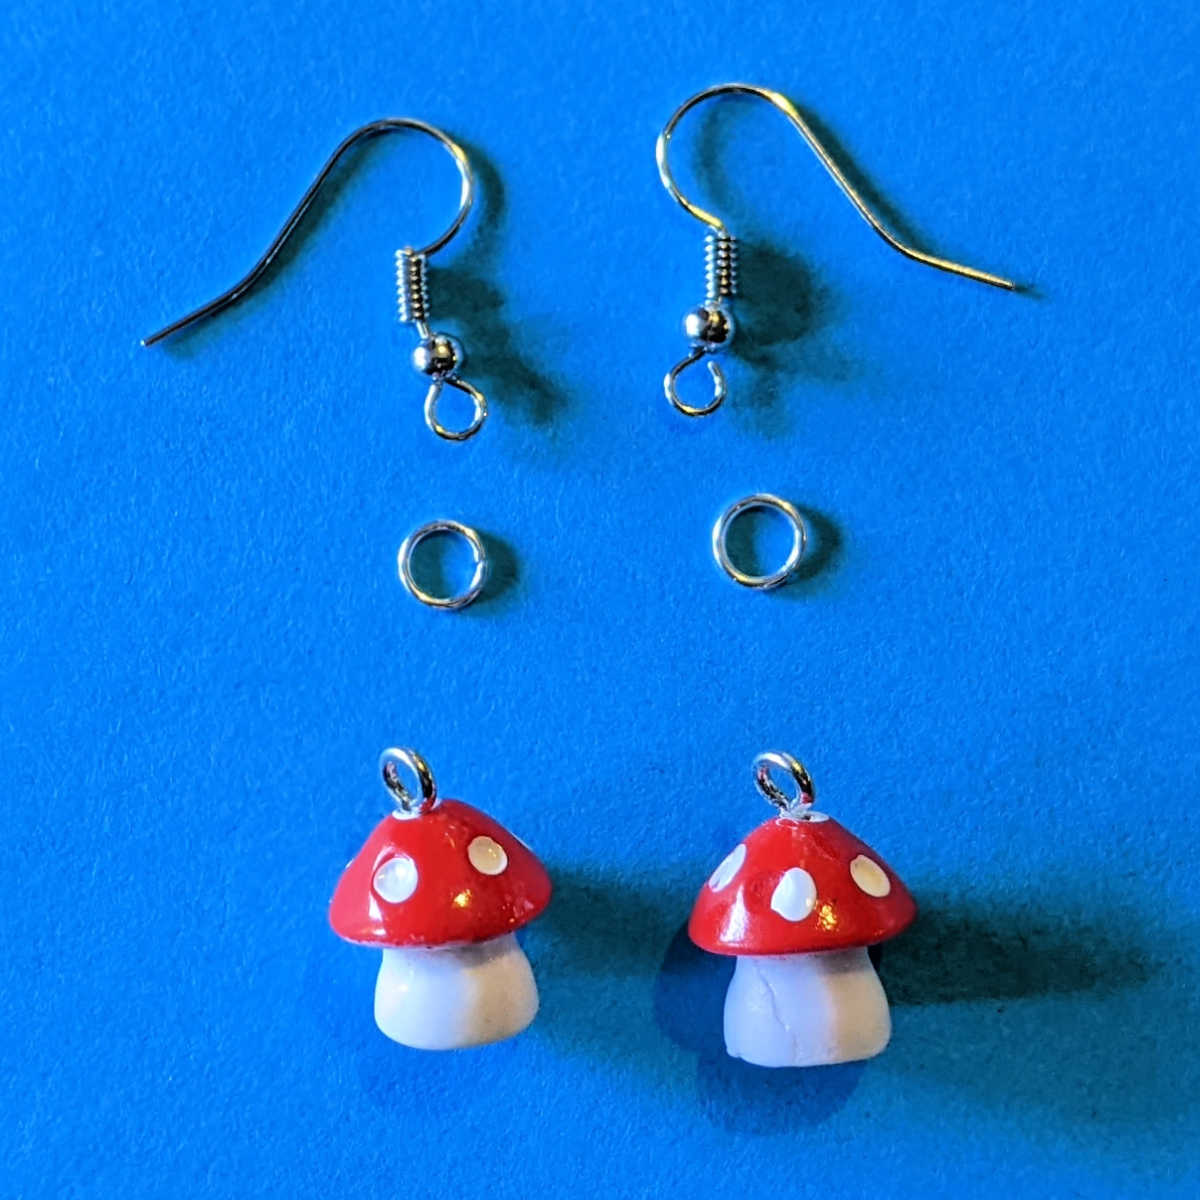 french hooks jump rings and charms